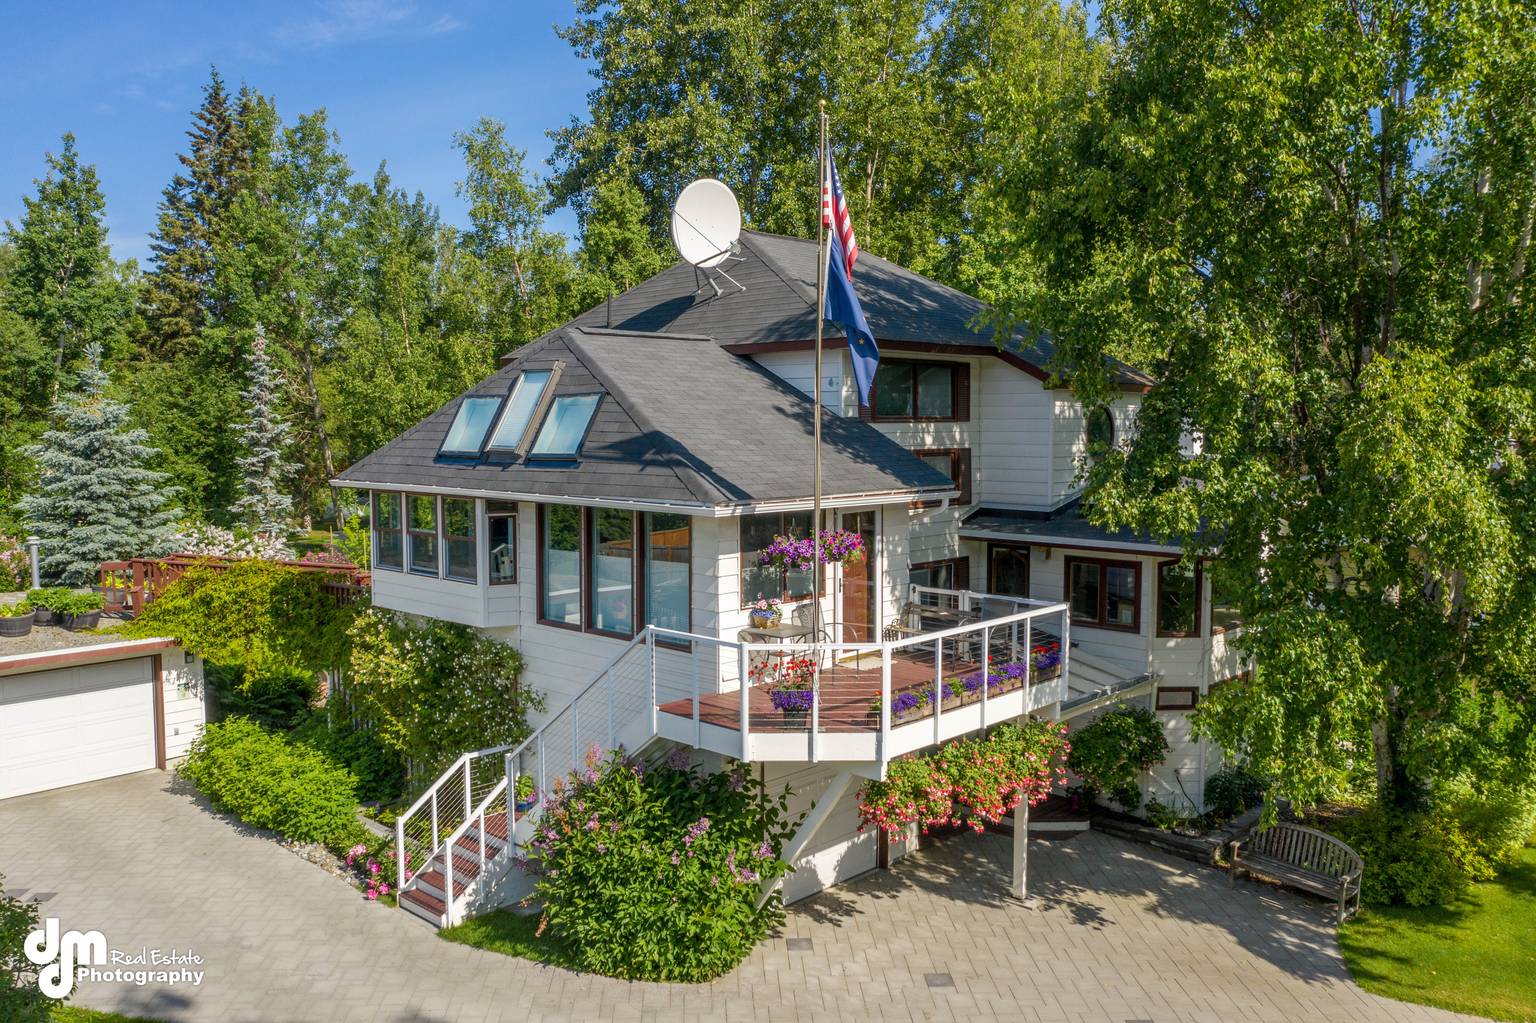 Anchorage Bed and Breakfast